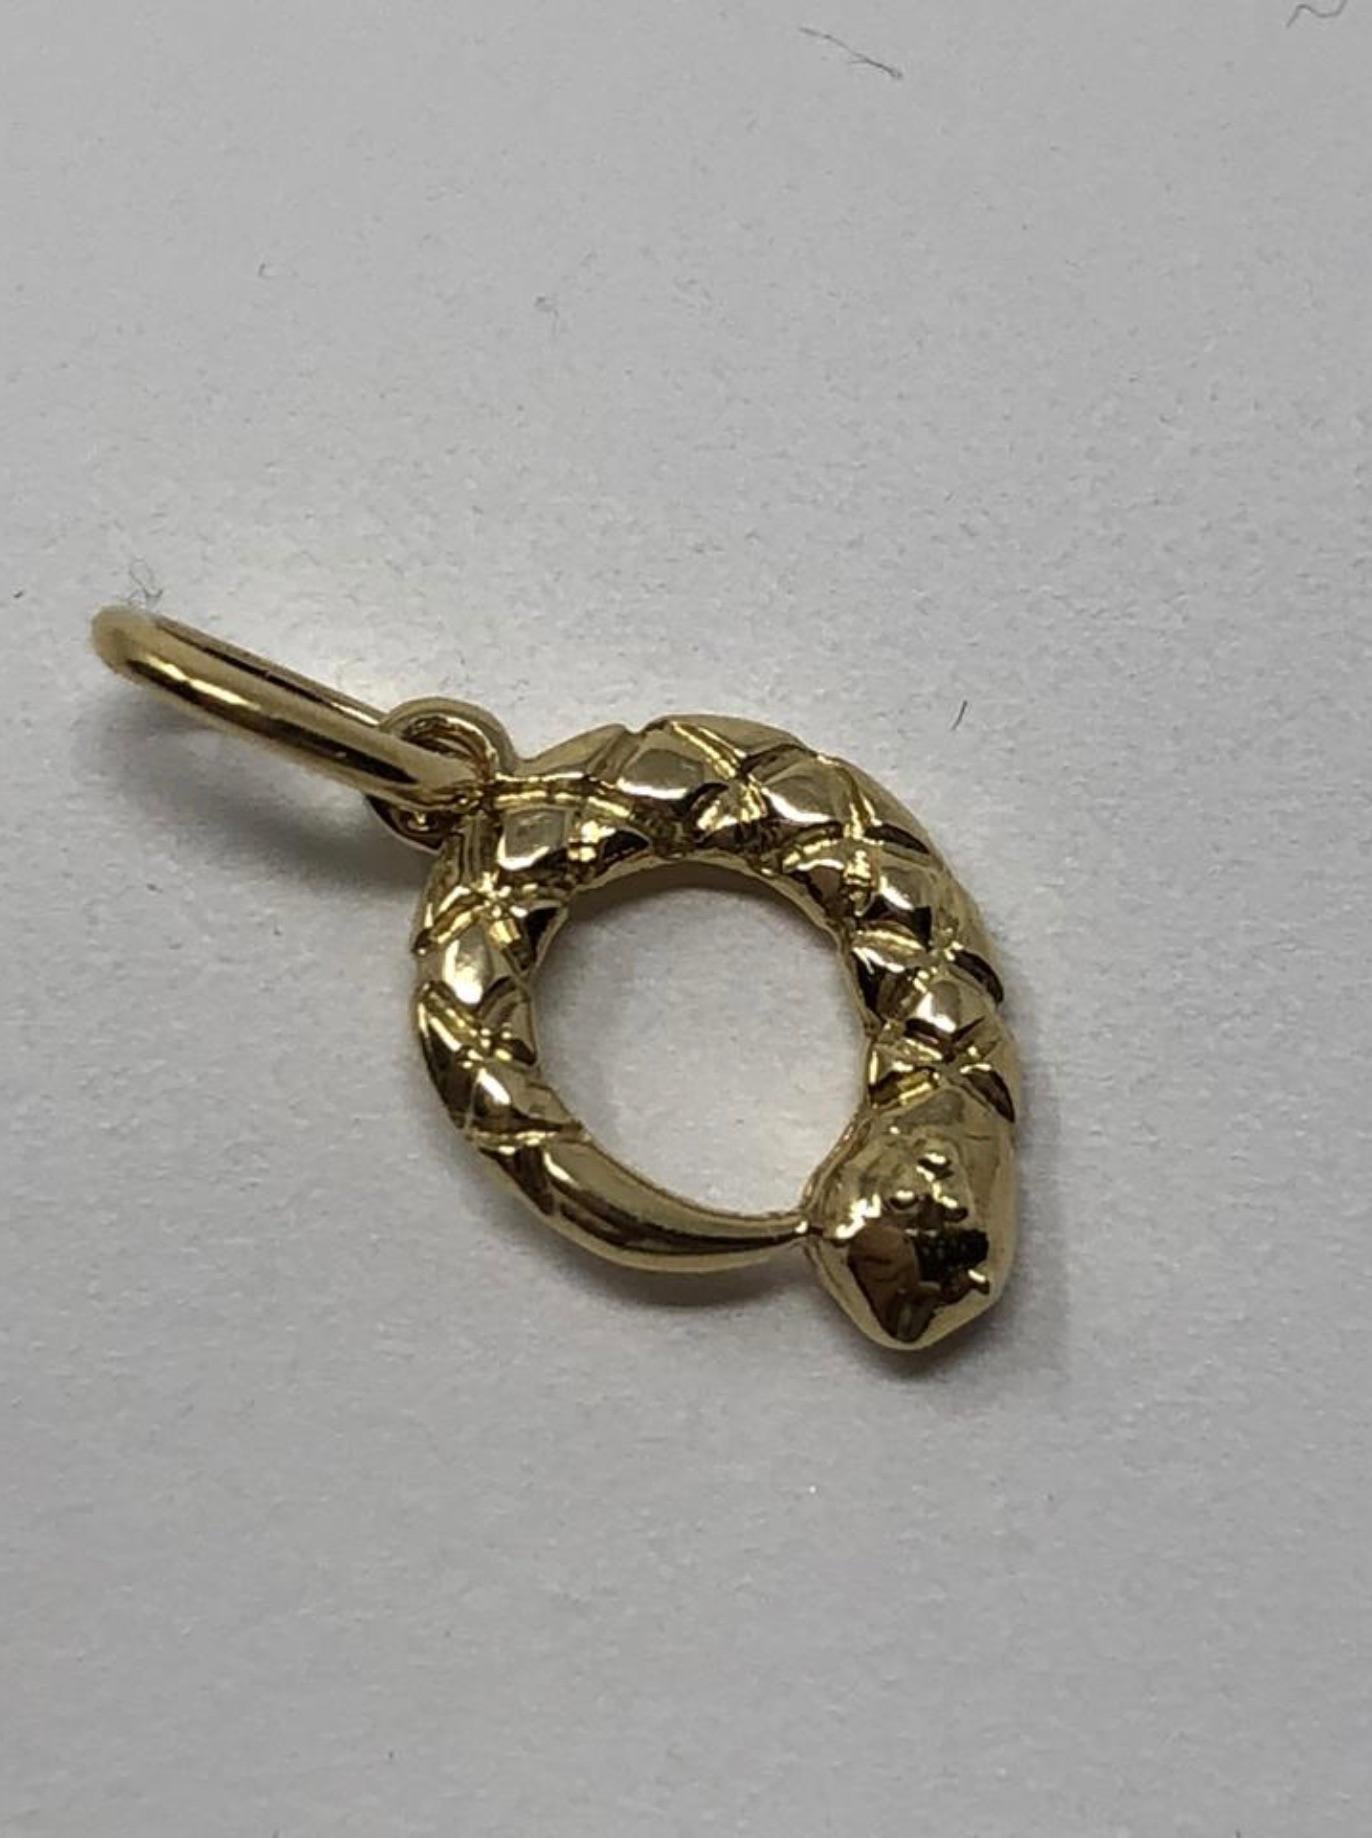 MODEL - Temple St Clair 18k Charm - Serpent

CONDITION - Exceptional! No signs of wear.

SKU - 2318

ORIGINAL RETAIL PRICE - 495 + tax

MATERIAL - 18k Gold

WEIGHT - 1.8 grams

DIMENSIONS - L11mm x H17mm (23mm with Jump Ring) x D4mm

COMES WITH -